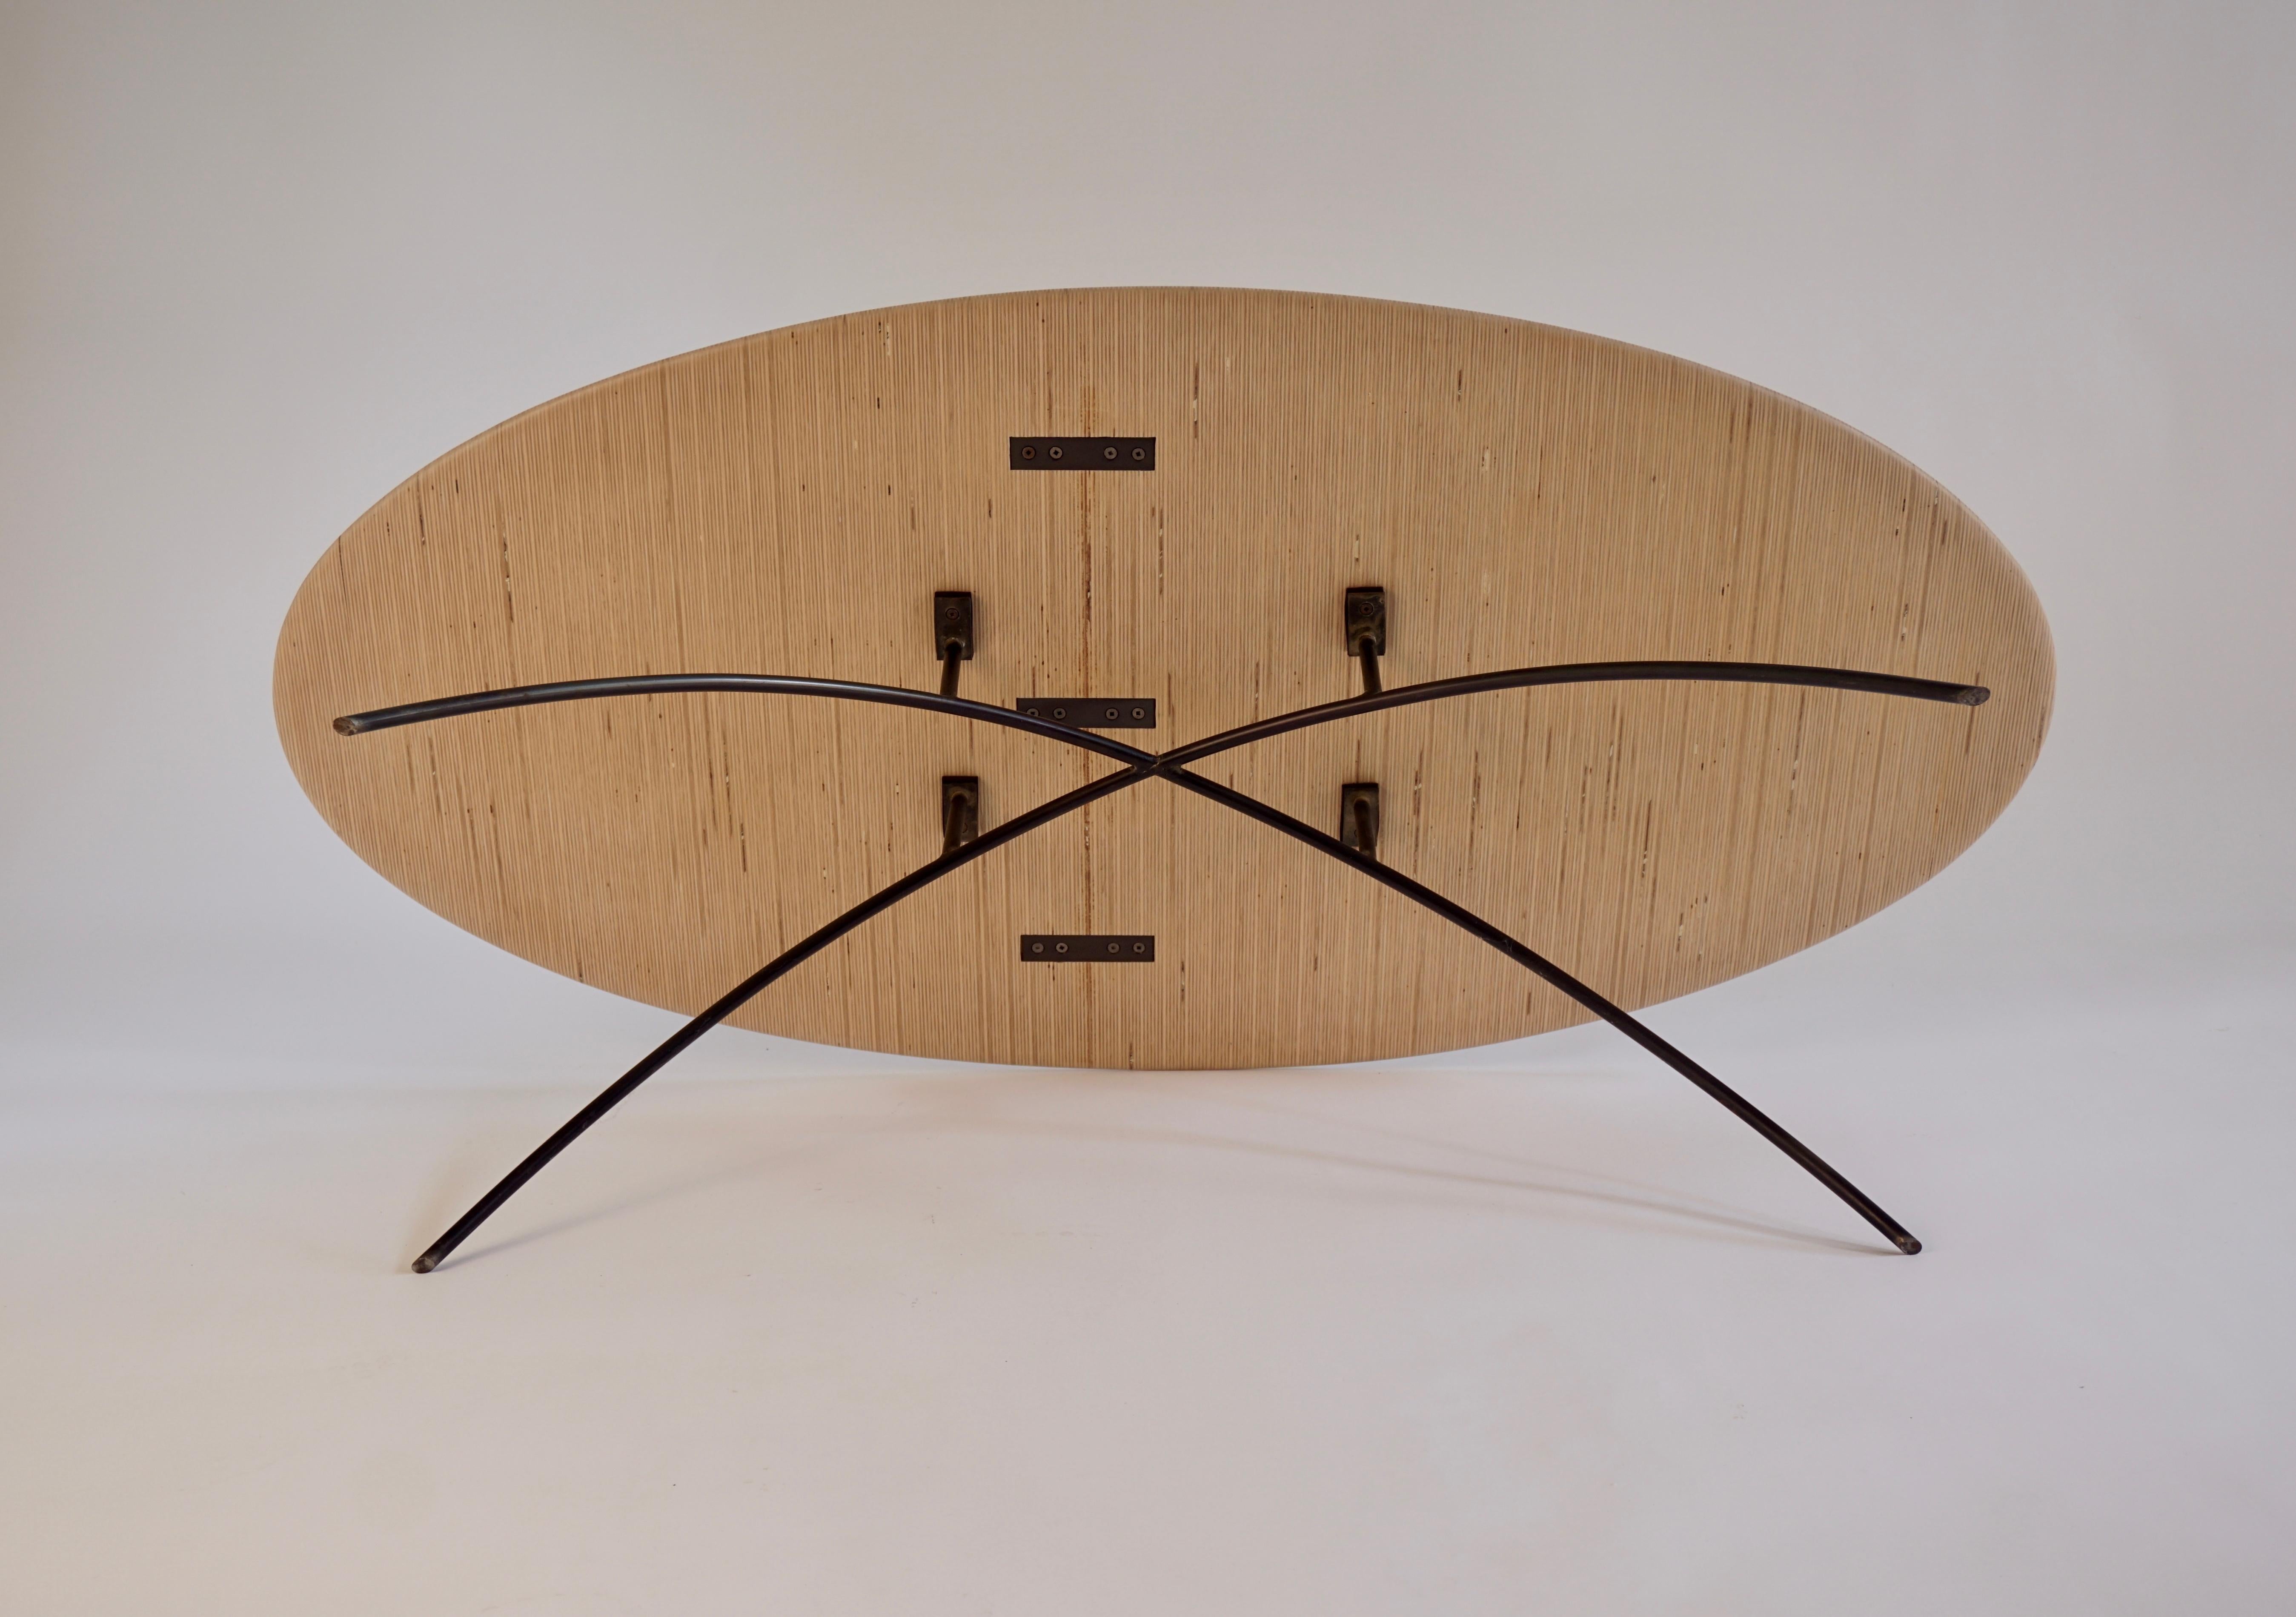 Sculpted Oval Coffee Table, Laminated Finnland Plywood 1